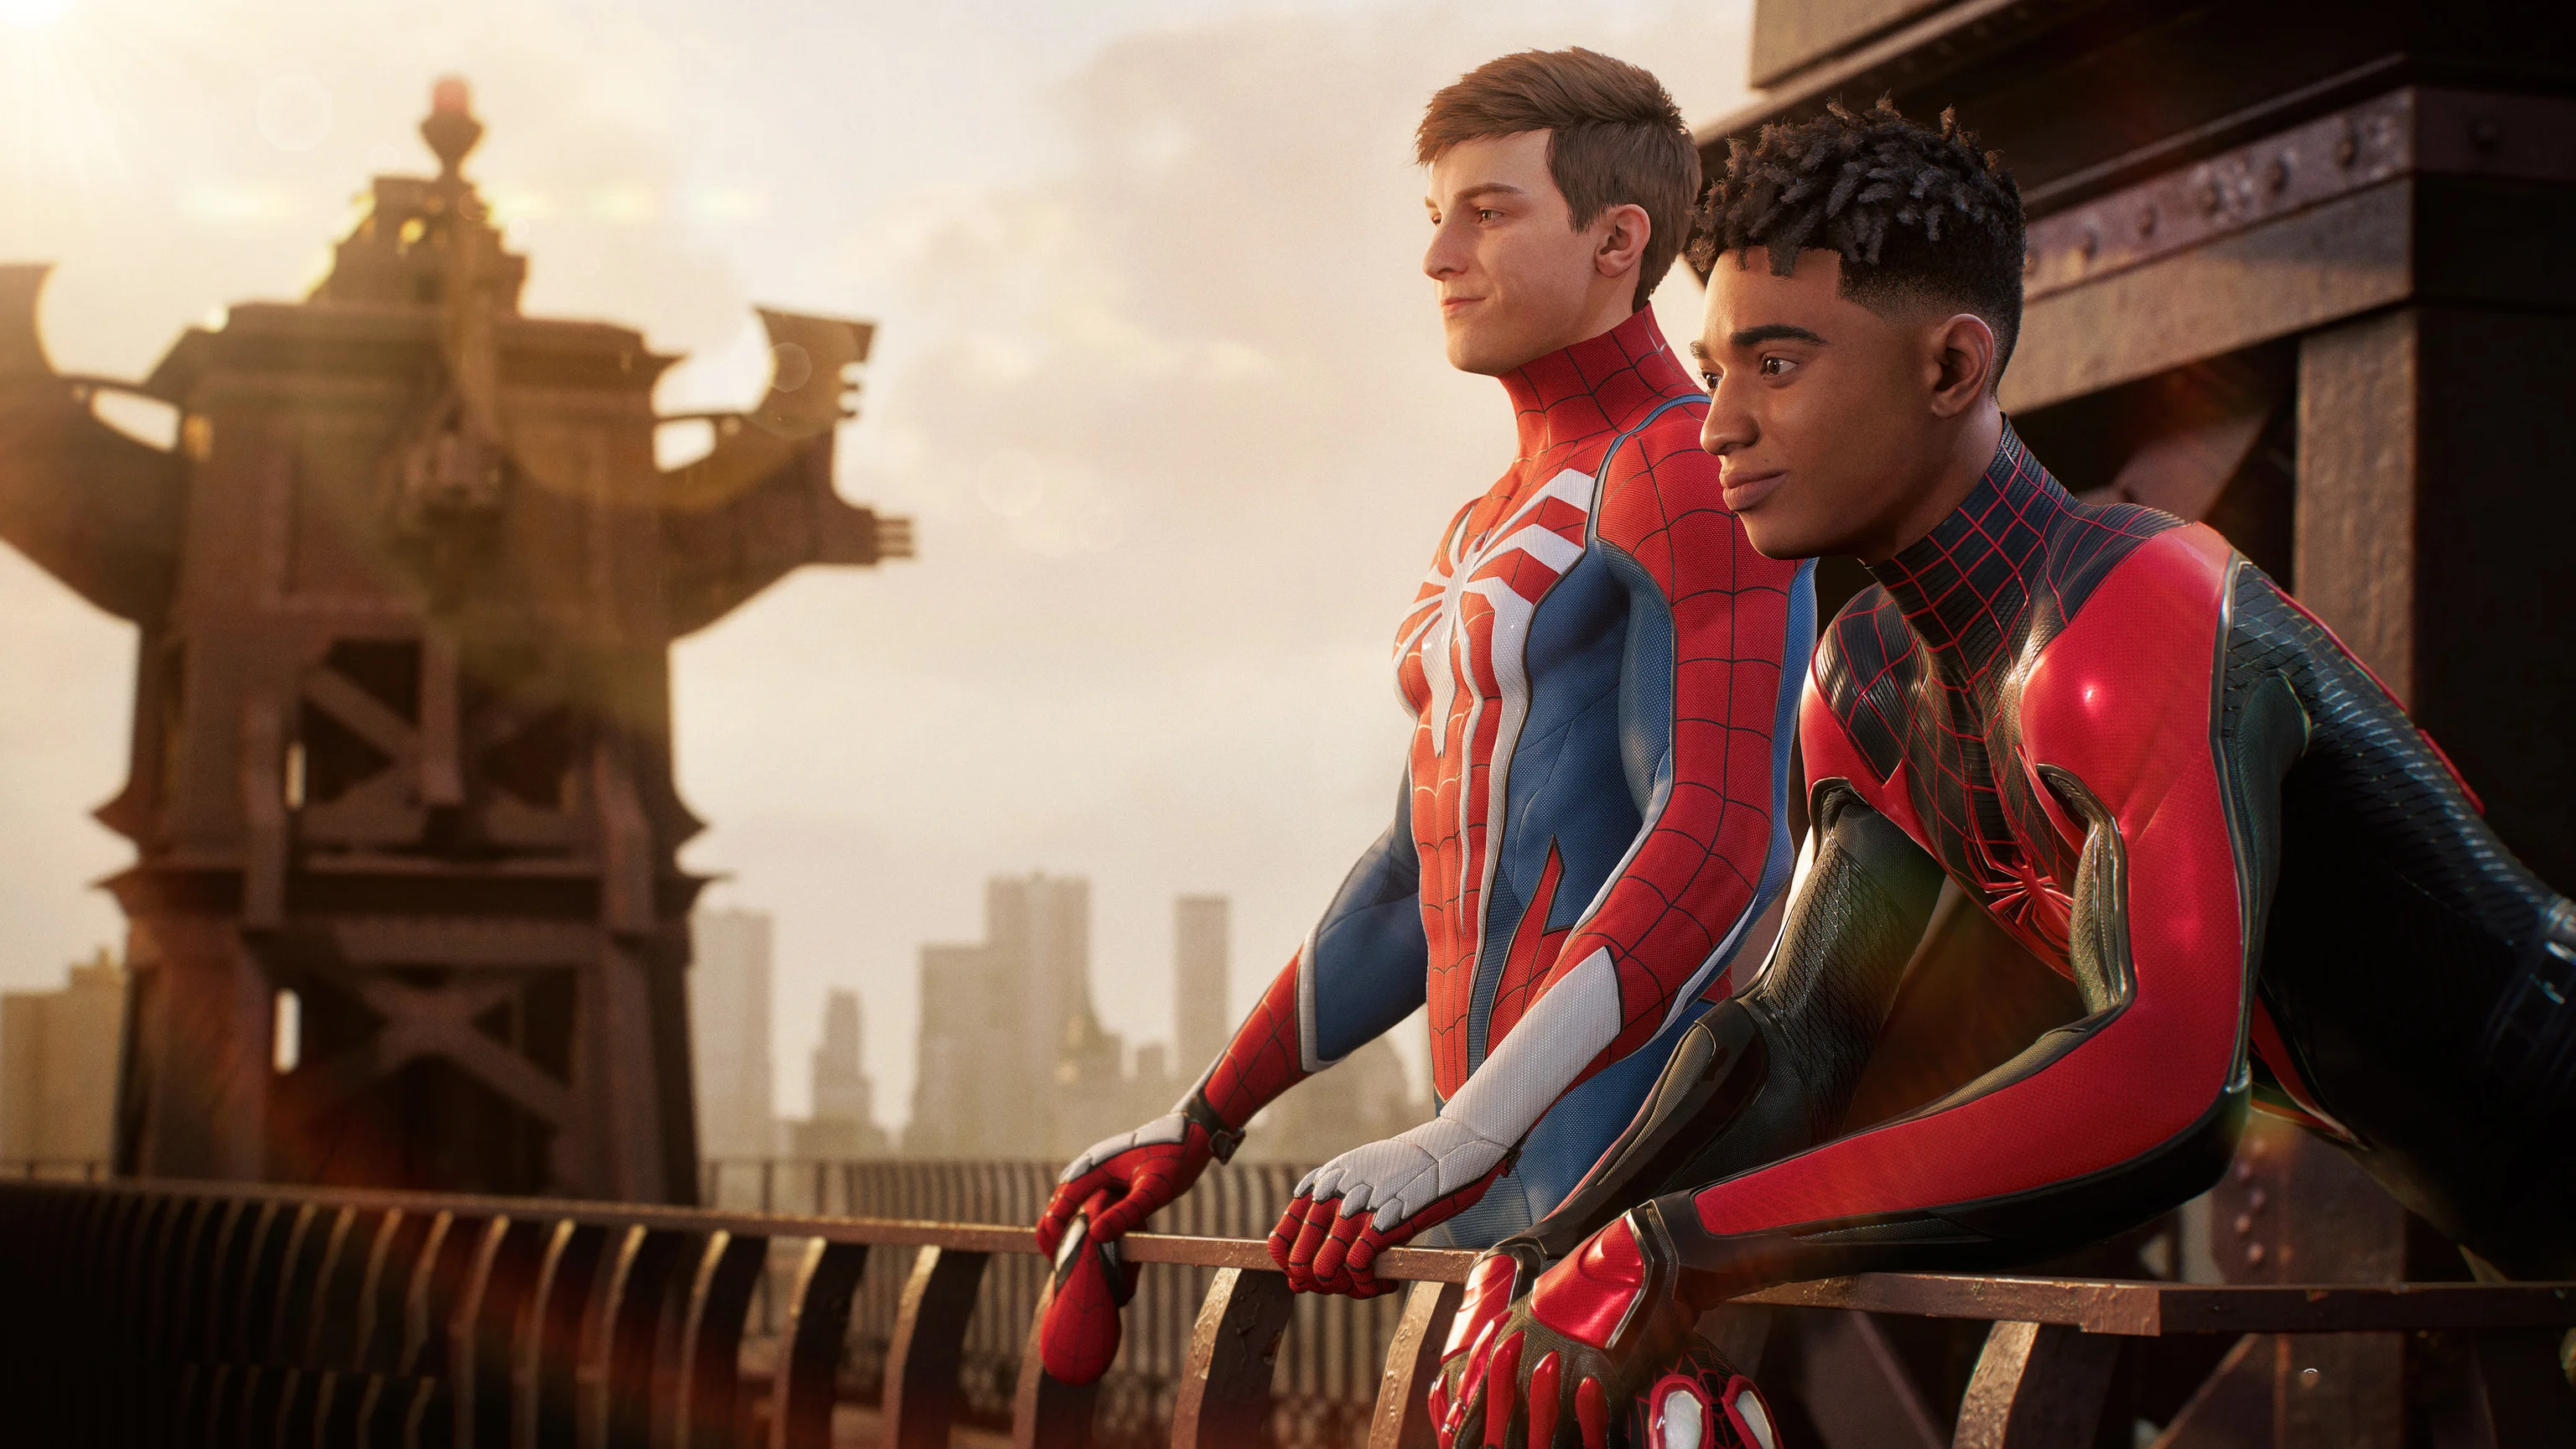 Marvel's Spider-Man 2 is getting three new costumes in upcoming updates